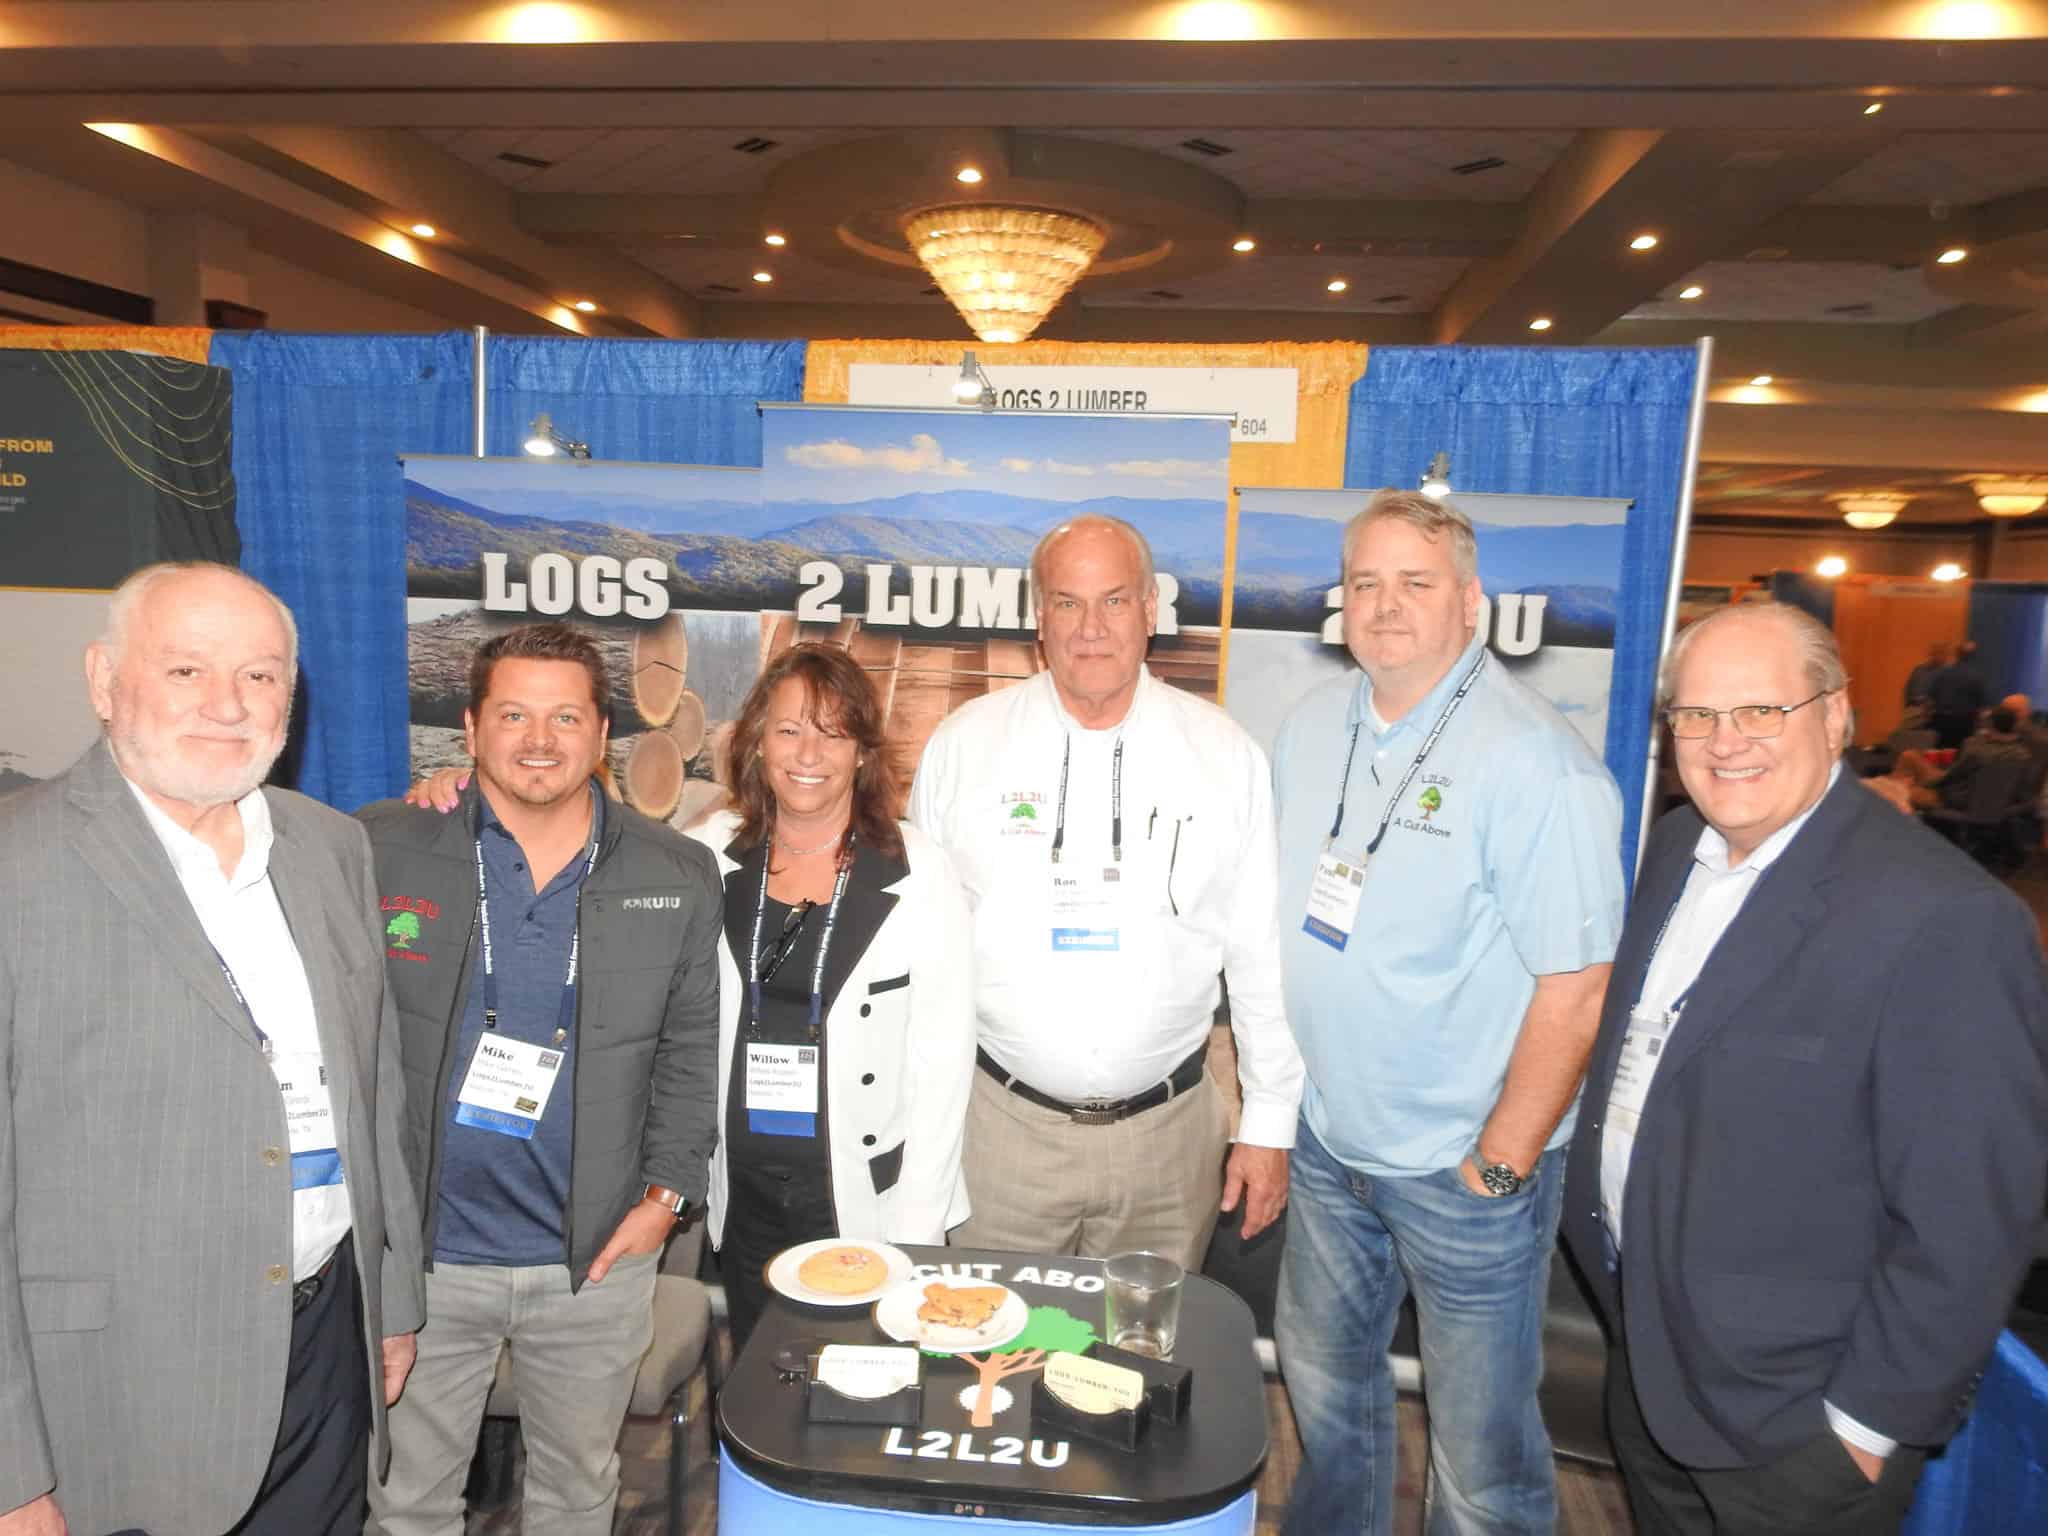 IHLA Expands Exhibit Hall 15 Percent, Welcomes 1,200 Attendees 85